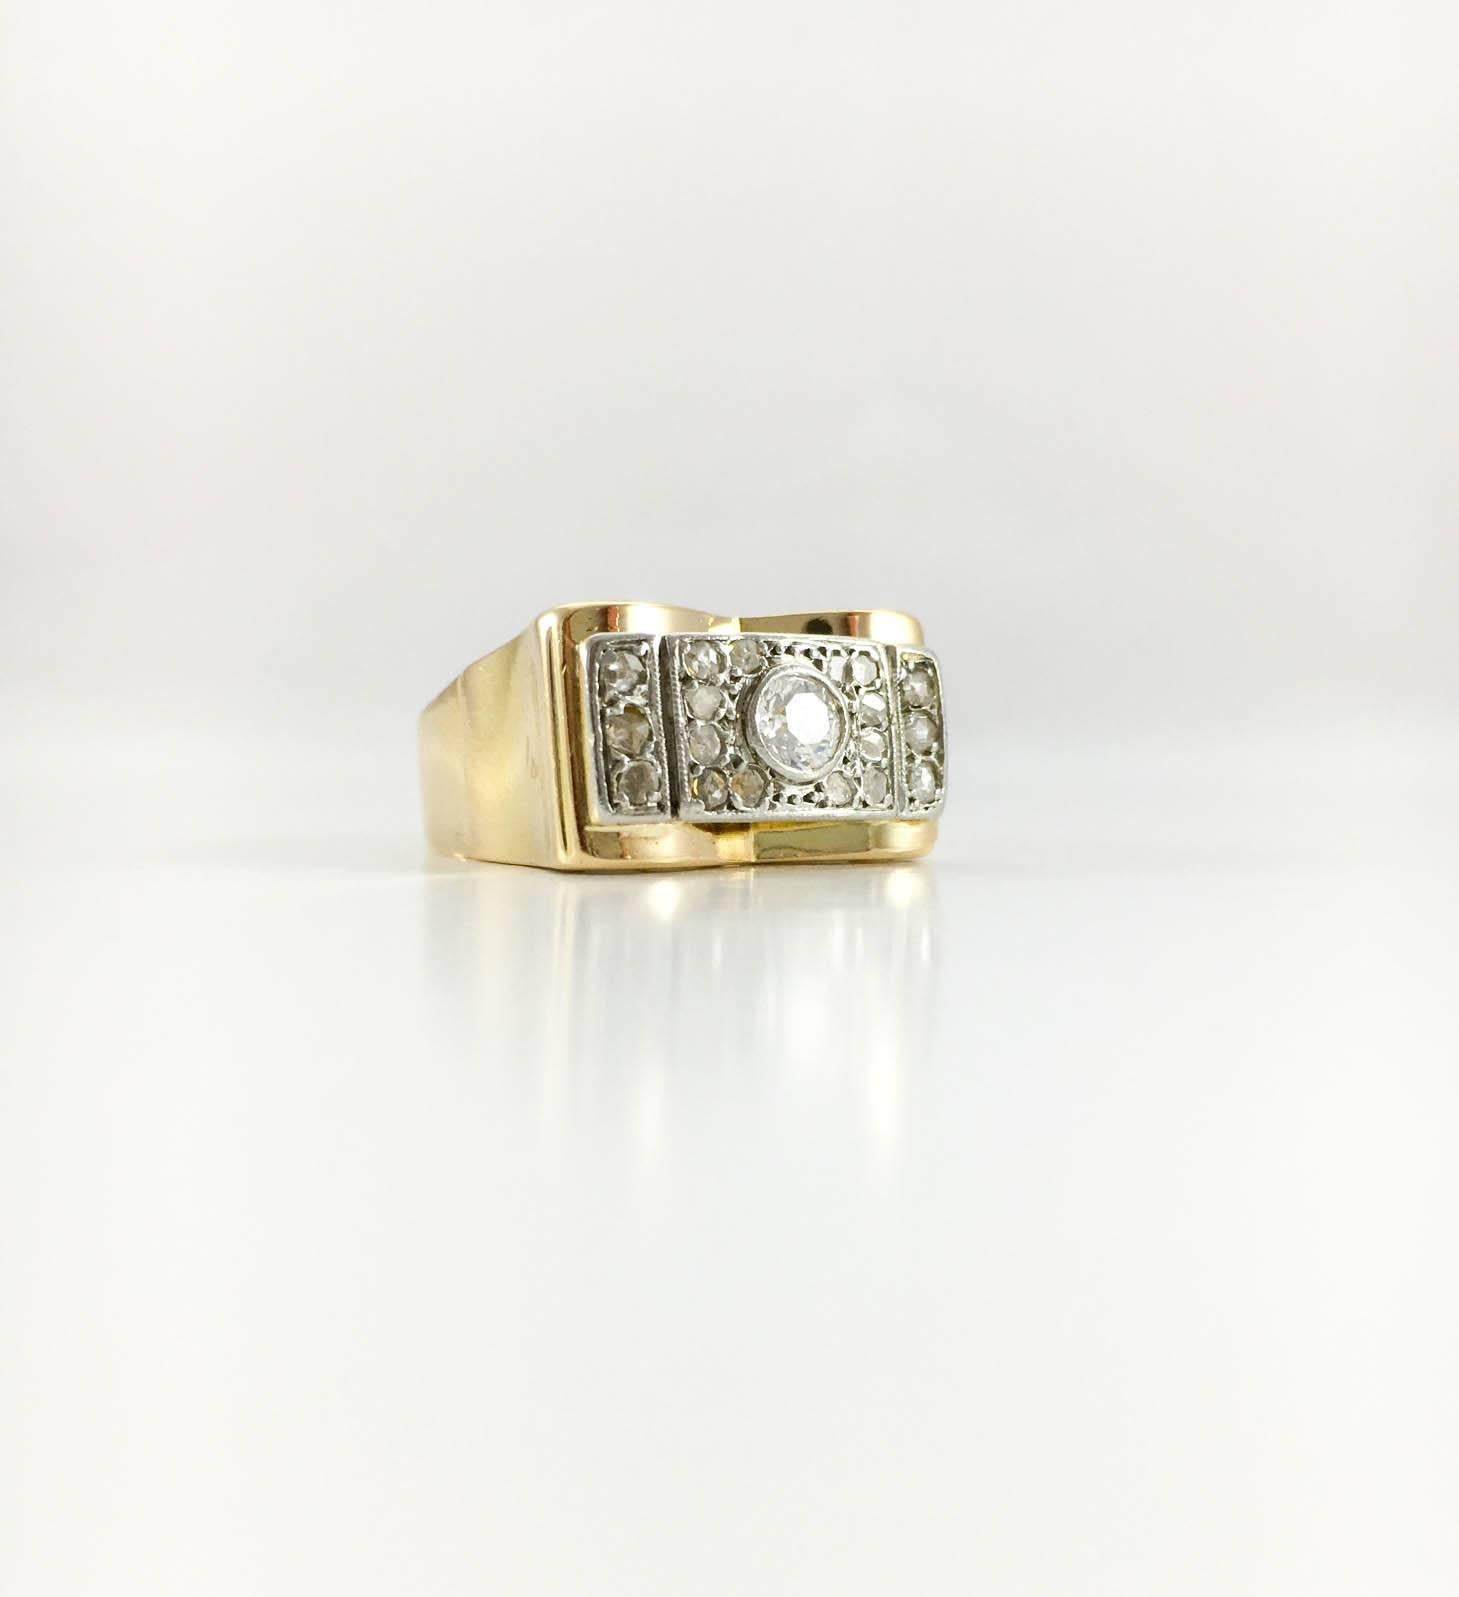 Amazing Vintage Gold and Diamond Cocktail Ring. This is a truly stunning example of the full-on glamour of the 1940s. Made in 18ct gold, this ring features a beautiful design created by diamonds. With 0.5 a carat, the diamond in the centre is